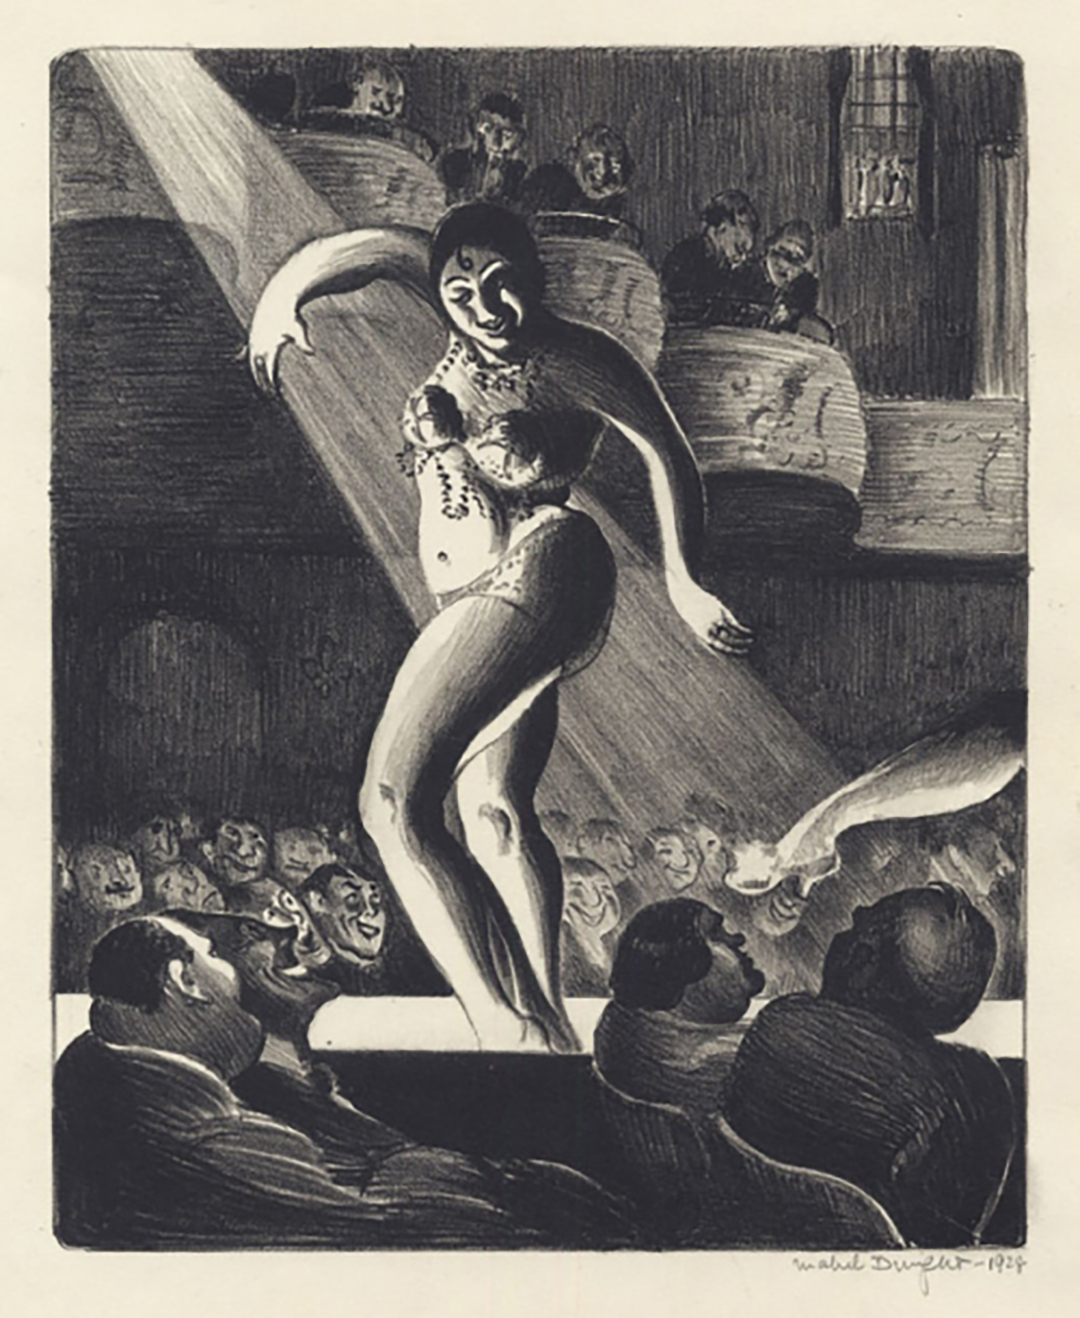 Mabel Dwight Houston Street Burlesque, 1928 Lithograph Image: 9 3/4 × 7 15/16 inches (24.8 × 20.2 cm) Paper: 16 × 11 1/2 inches (40.6 × 29.2 cm) Edition of 50